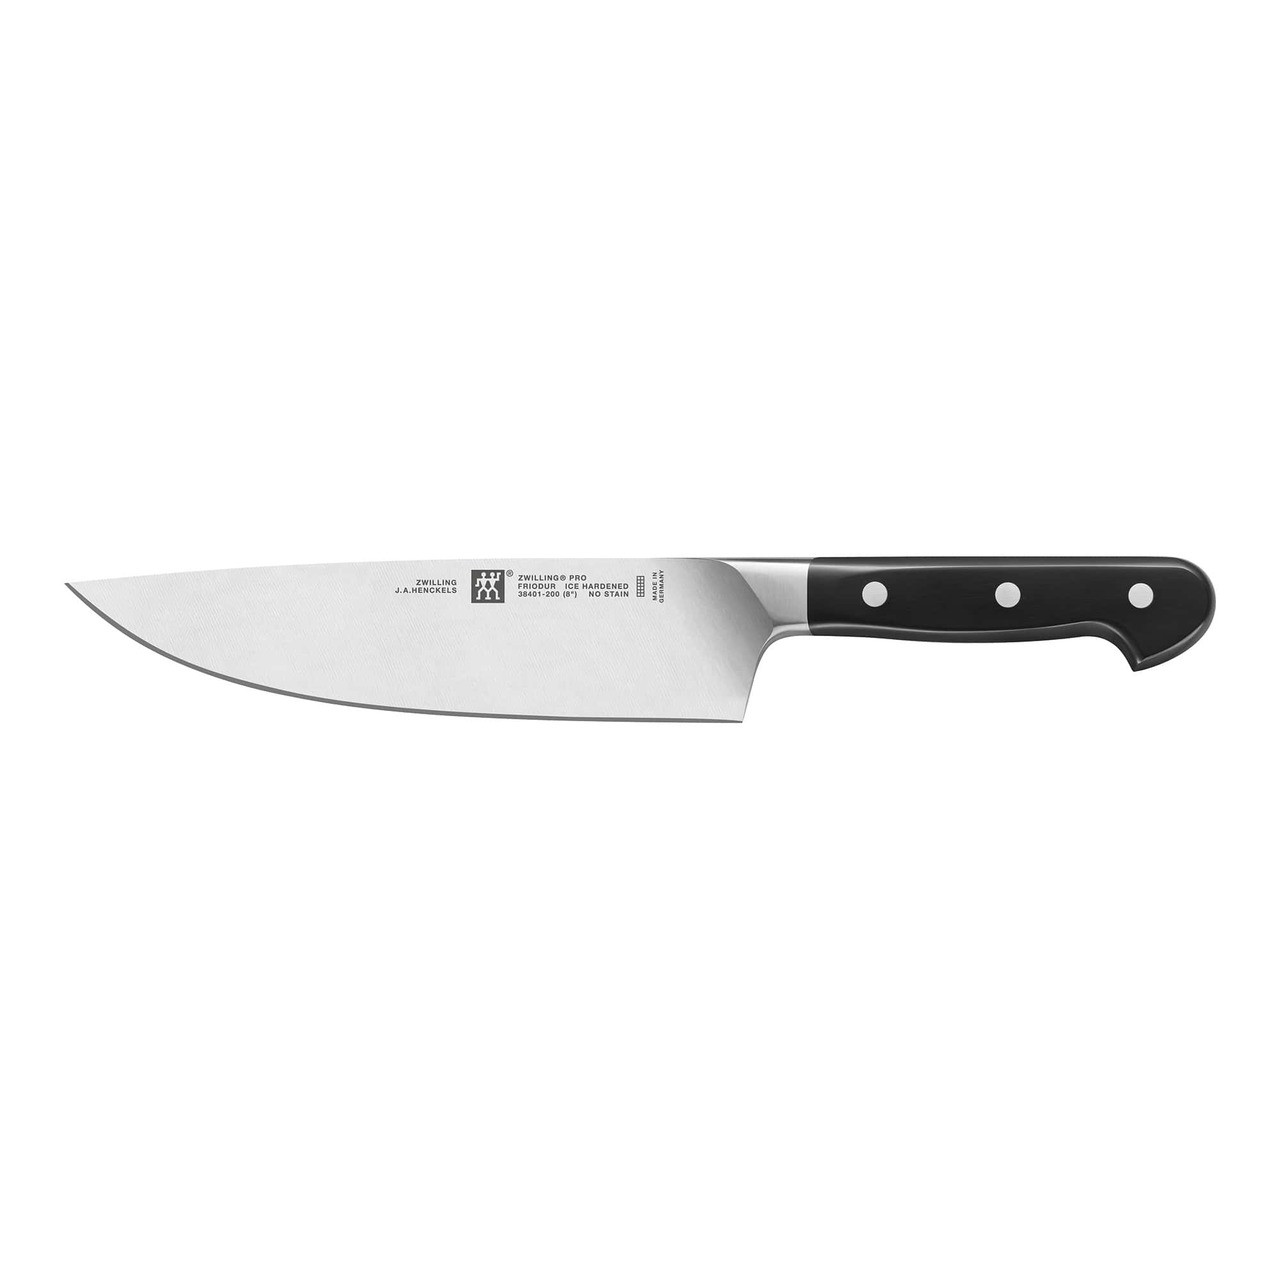 https://cdn11.bigcommerce.com/s-hccytny0od/images/stencil/1280x1280/products/673/1075/zwilling-pro-chefs-knife-8-inch__18193.1509981384.jpg?c=2?imbypass=on